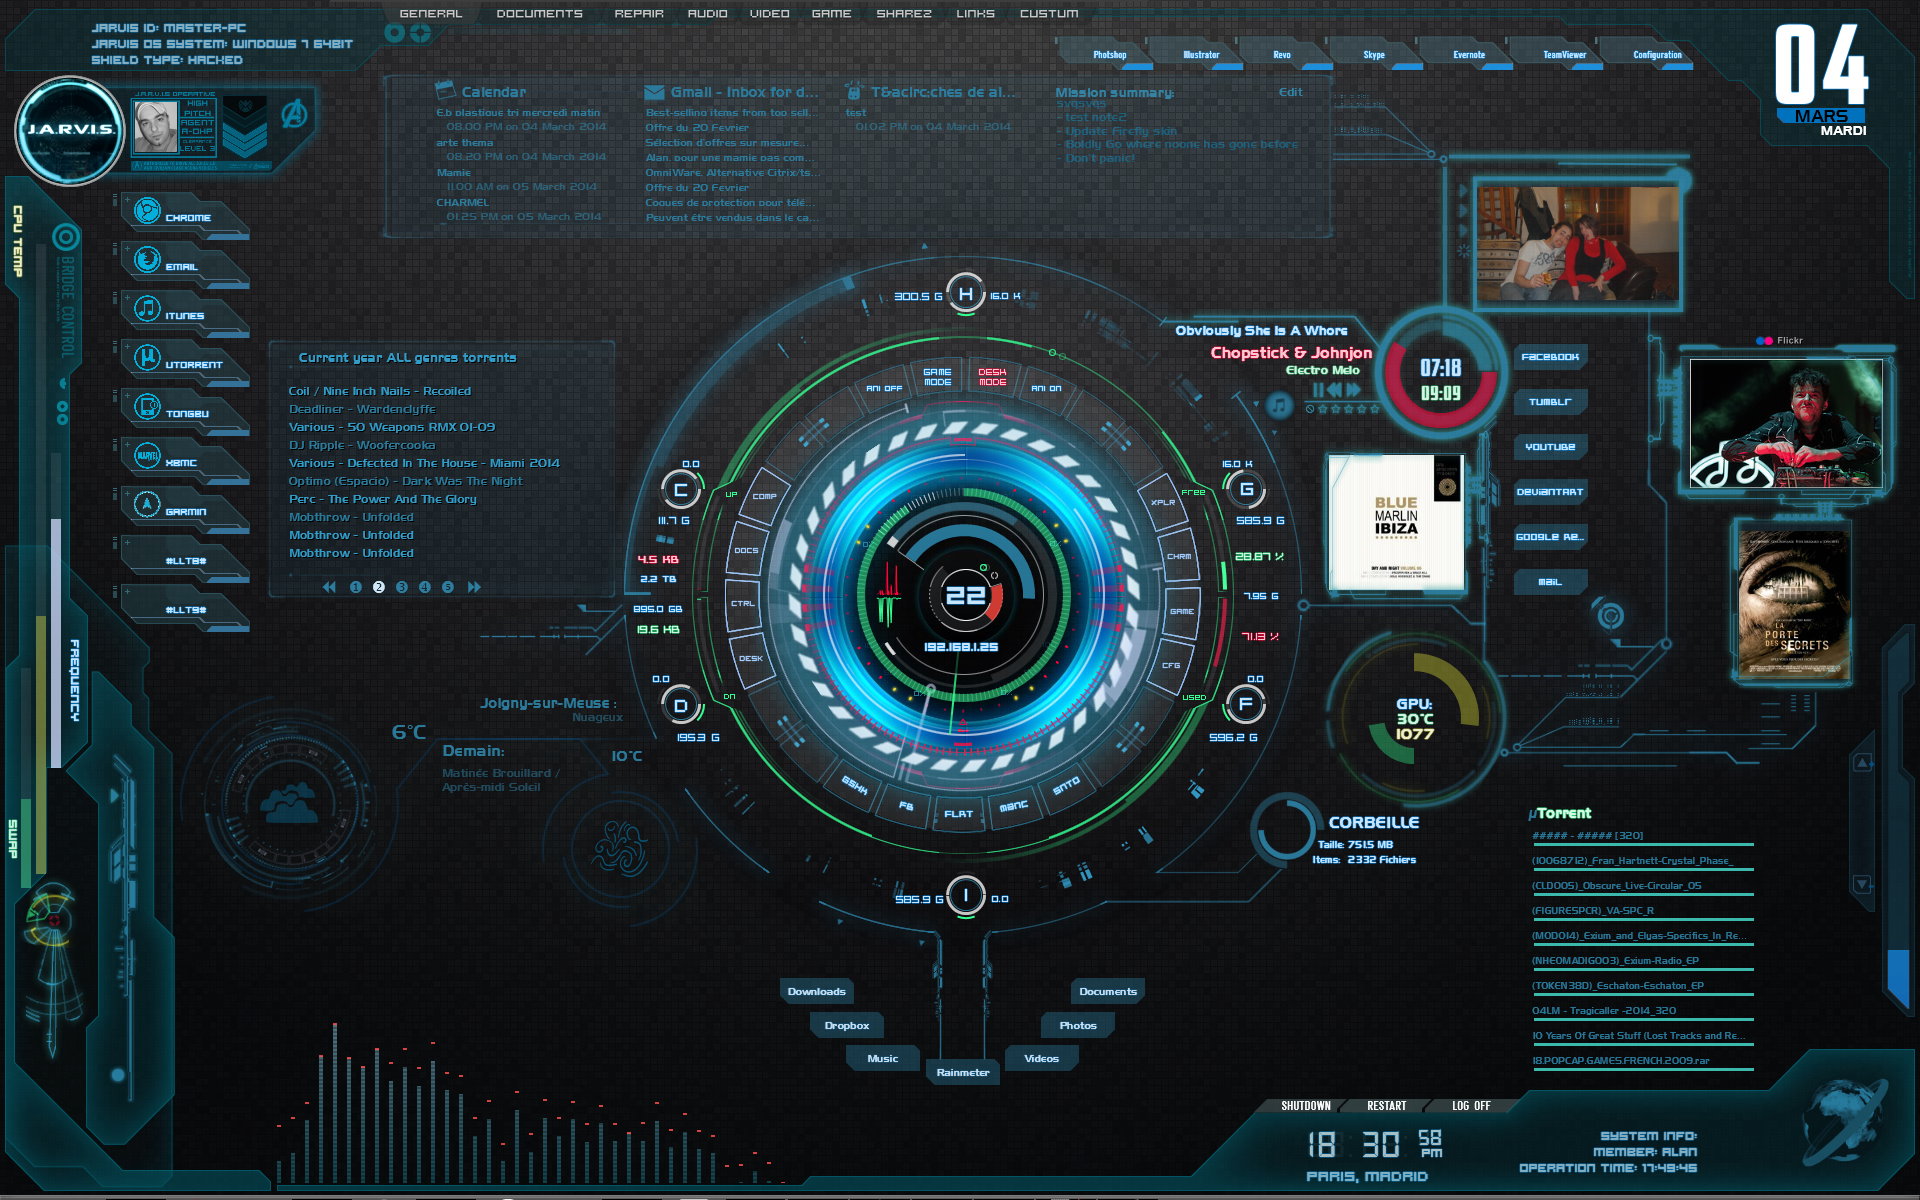 JARVIS Highpitched OS 1.1.1 by 5yNt3t1K on DeviantArt1920 x 1200